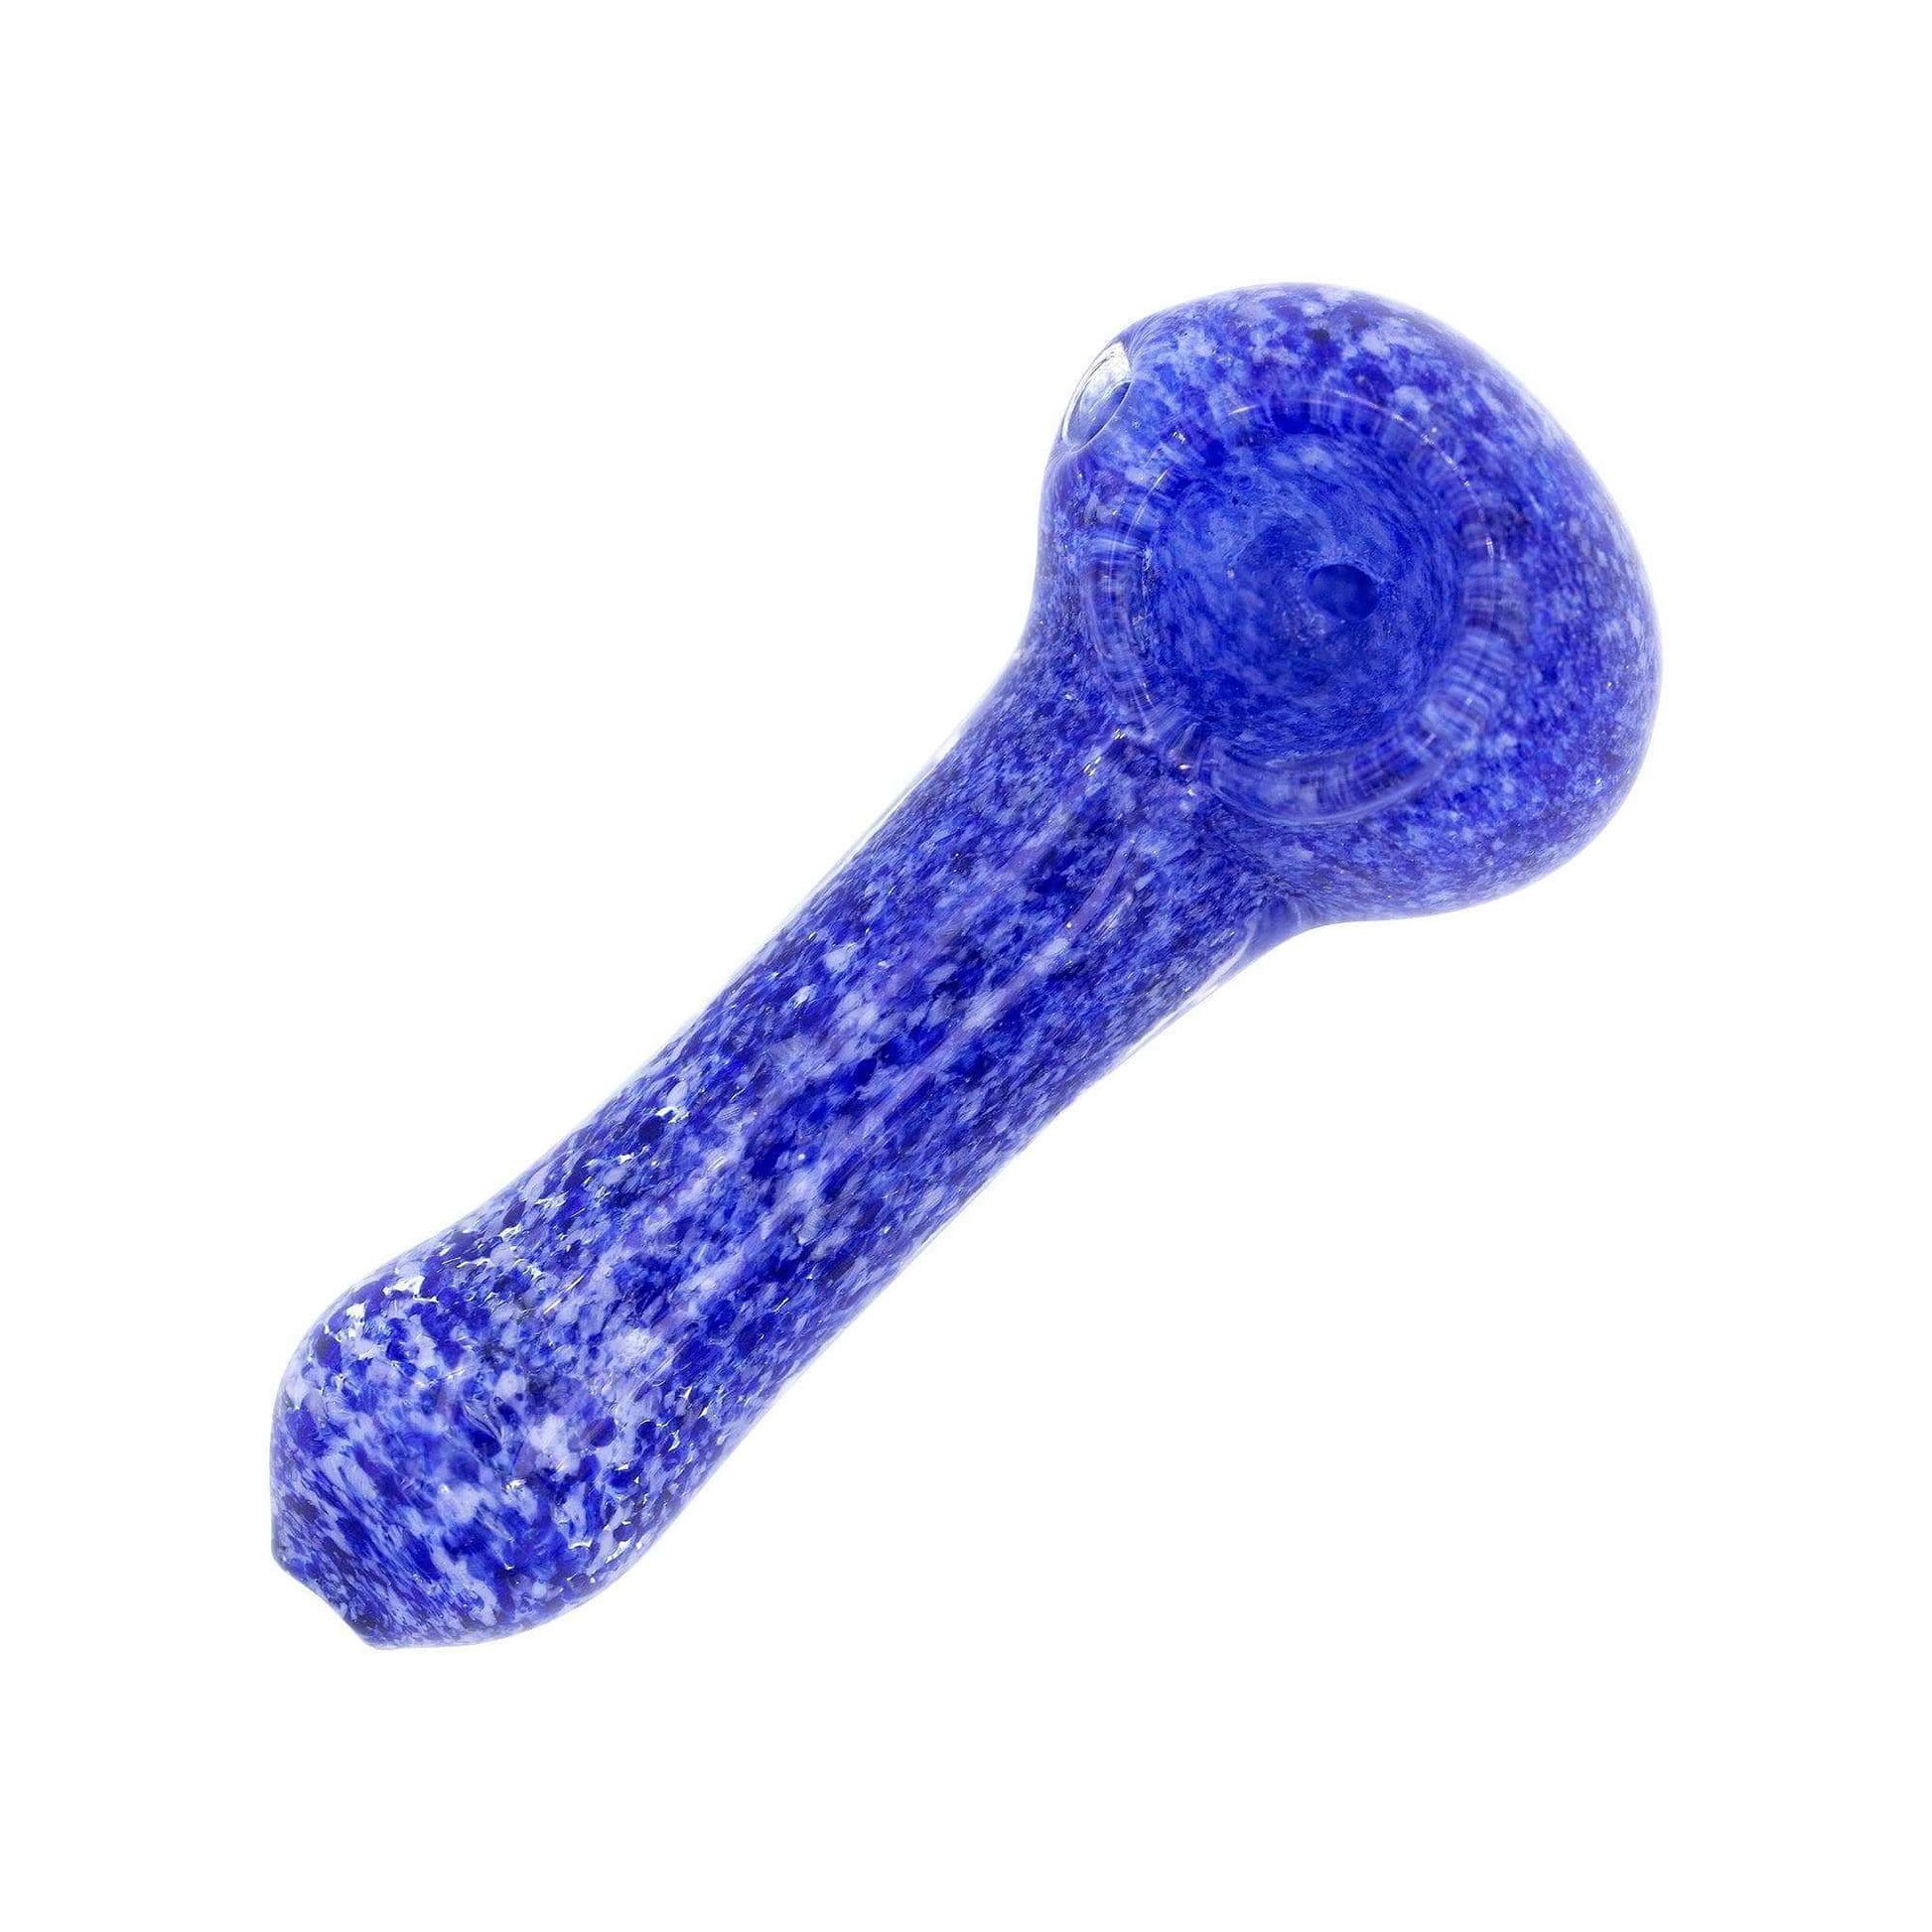 Blue Stylish 4-inch compact glass pipe smoking device with speckled marble-like design spoon shape